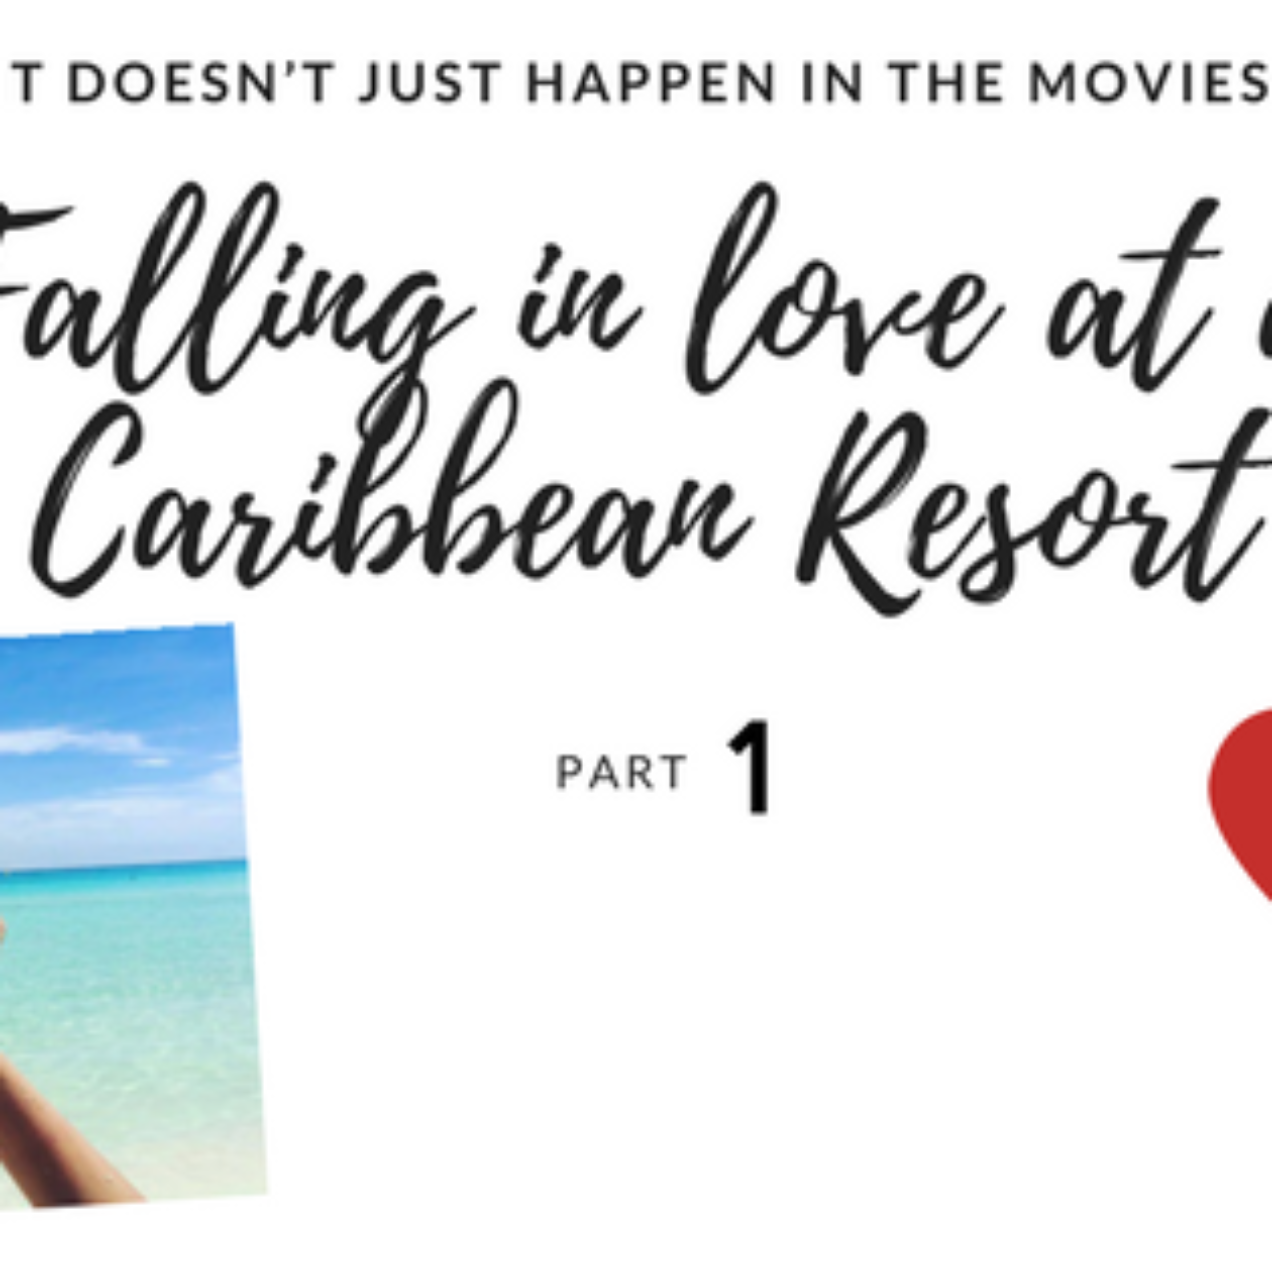 It doesn’t just happen in the movies: Falling in love at a Caribbean Resort (Part 1)